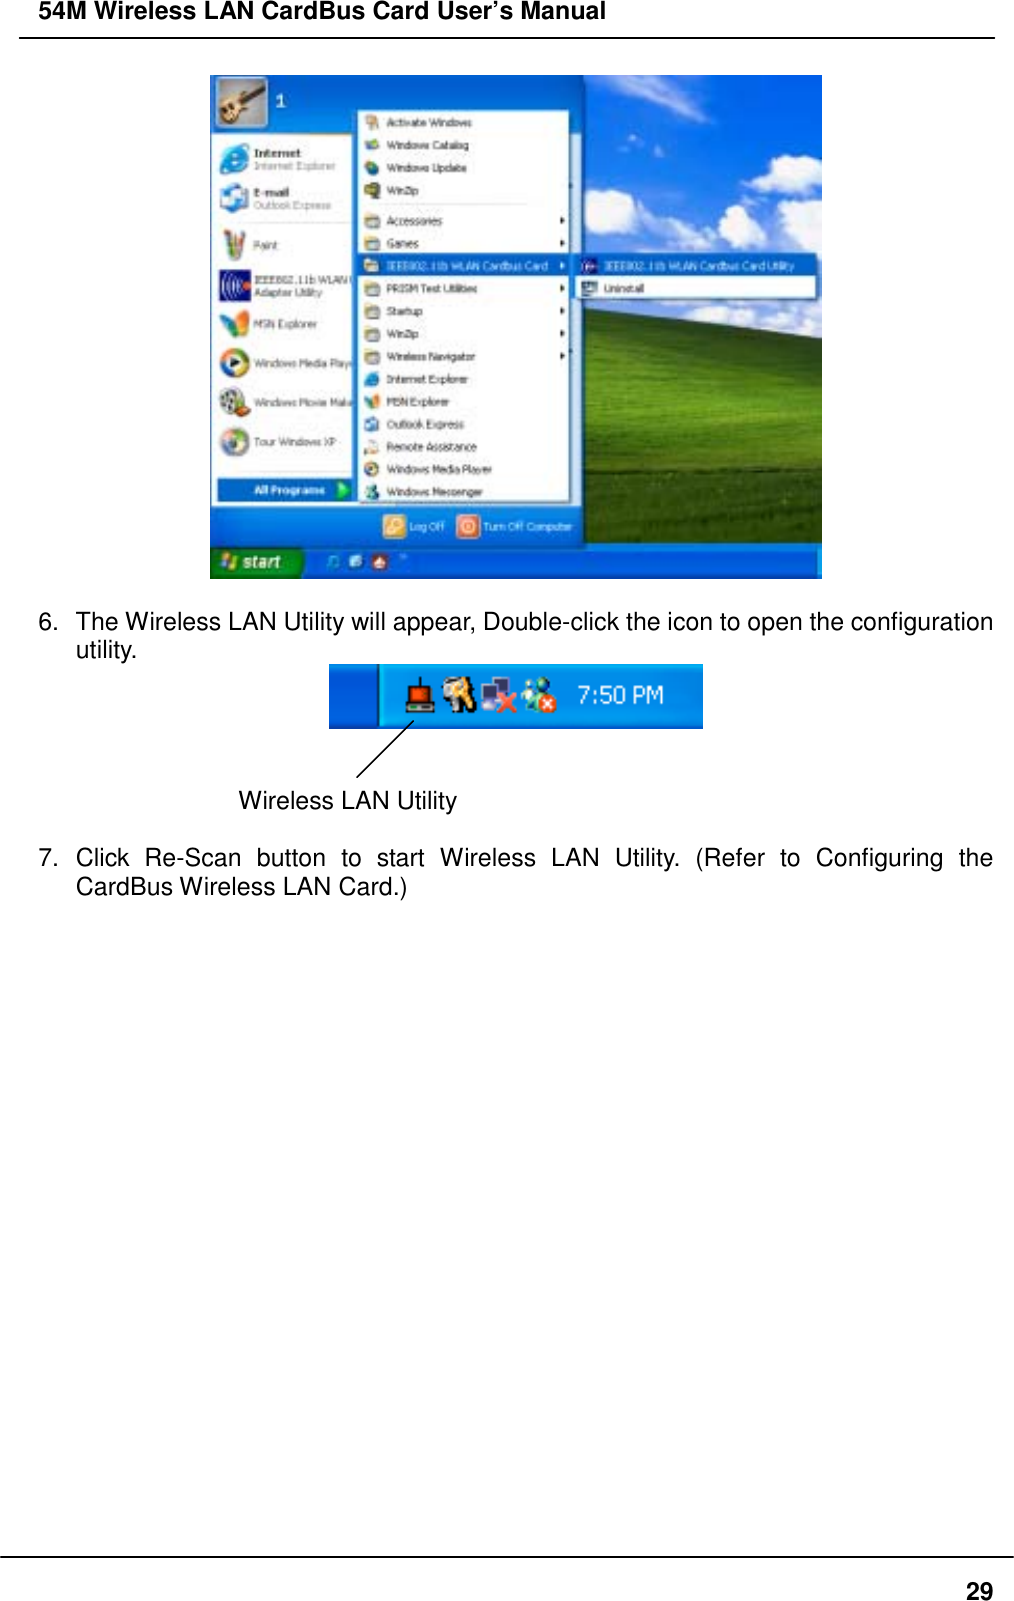 54M Wireless LAN CardBus Card User’s Manual296.  The Wireless LAN Utility will appear, Double-click the icon to open the configurationutility.Wireless LAN Utility7. Click Re-Scan button to start Wireless LAN Utility. (Refer to Configuring theCardBus Wireless LAN Card.)